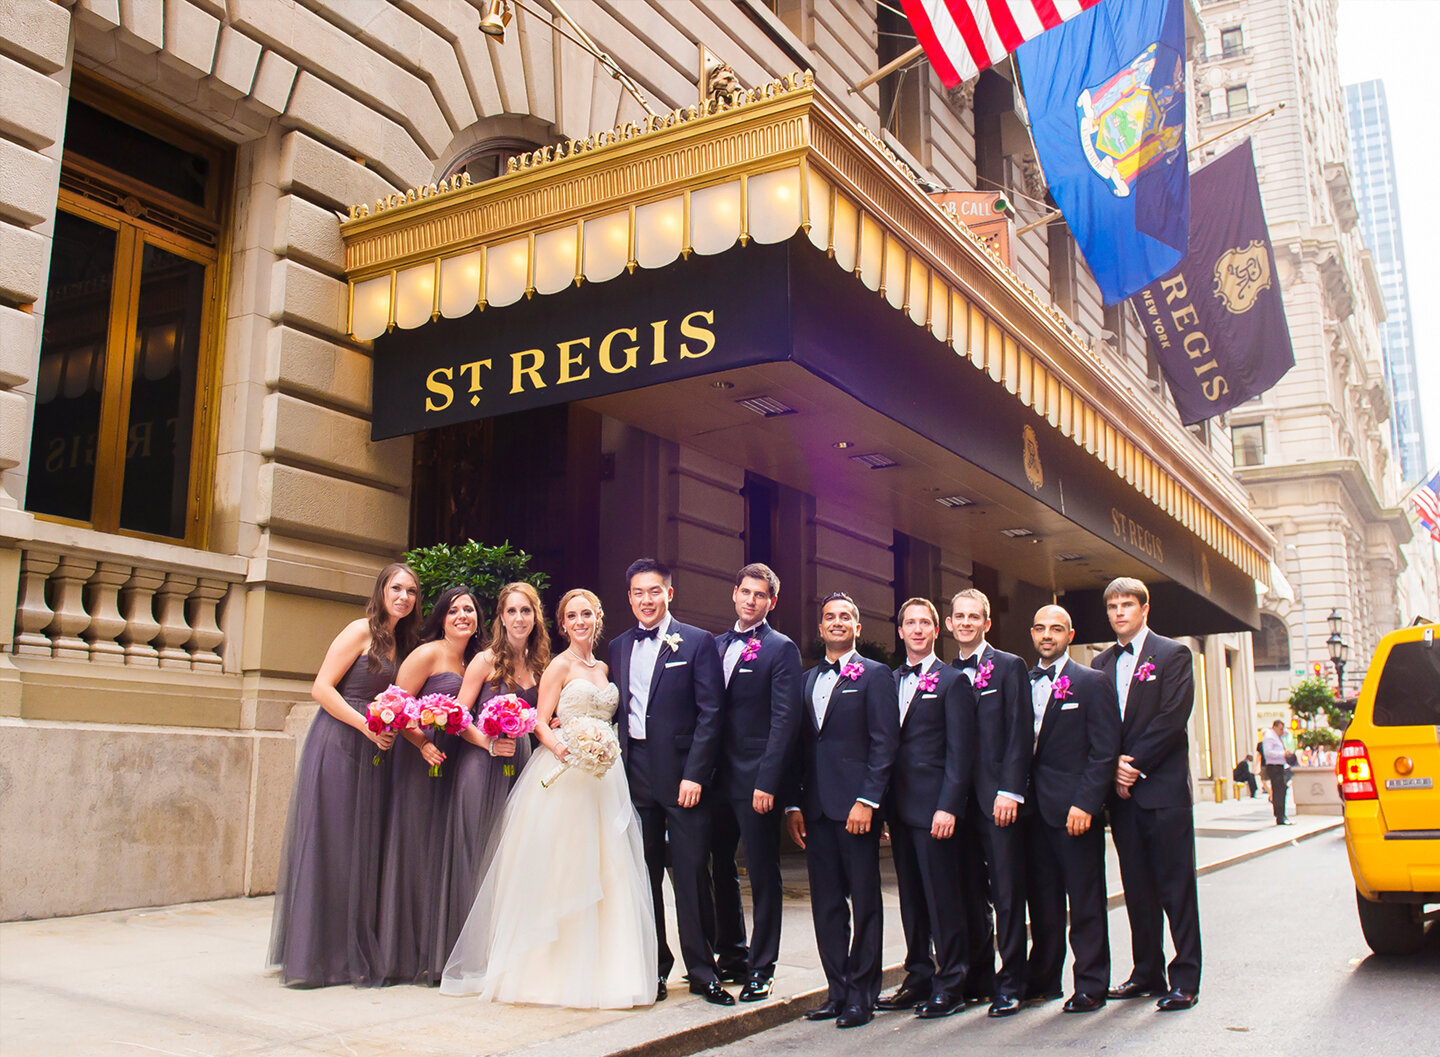 Group picture outside St. Regis Hotel